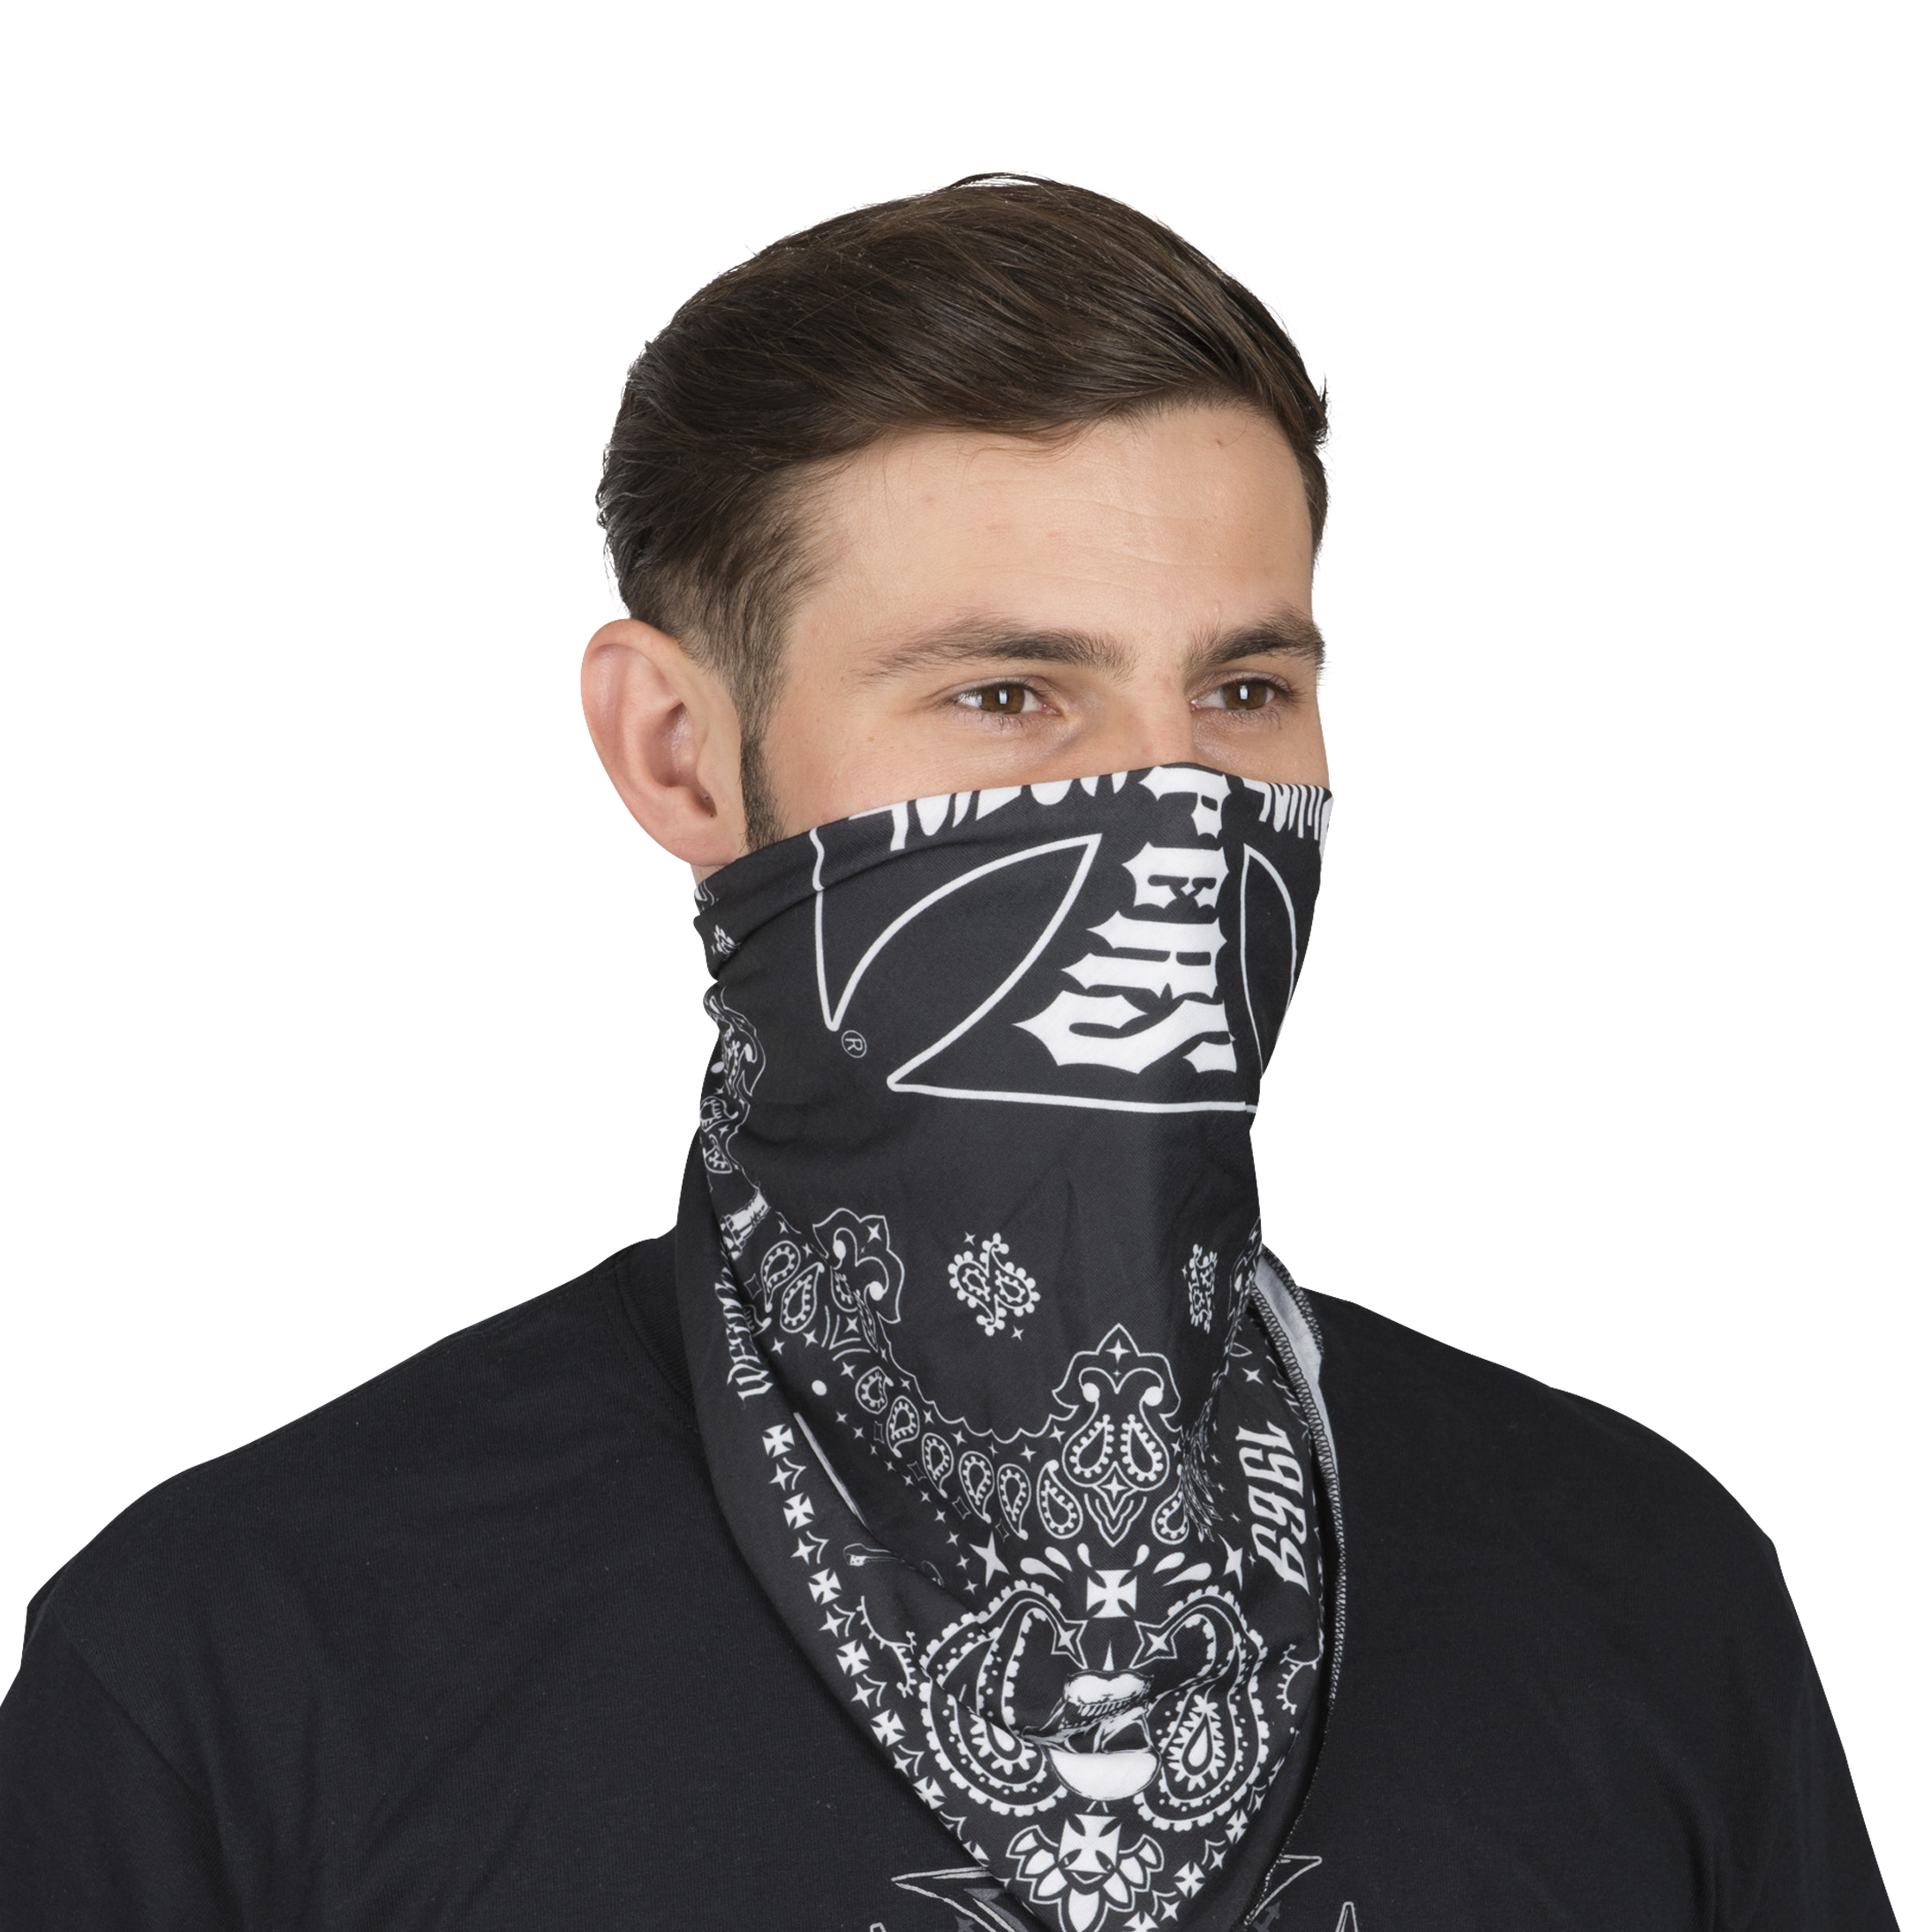 Bandana West Coast Choppers Handcrafted - Lowest Price Guarantee